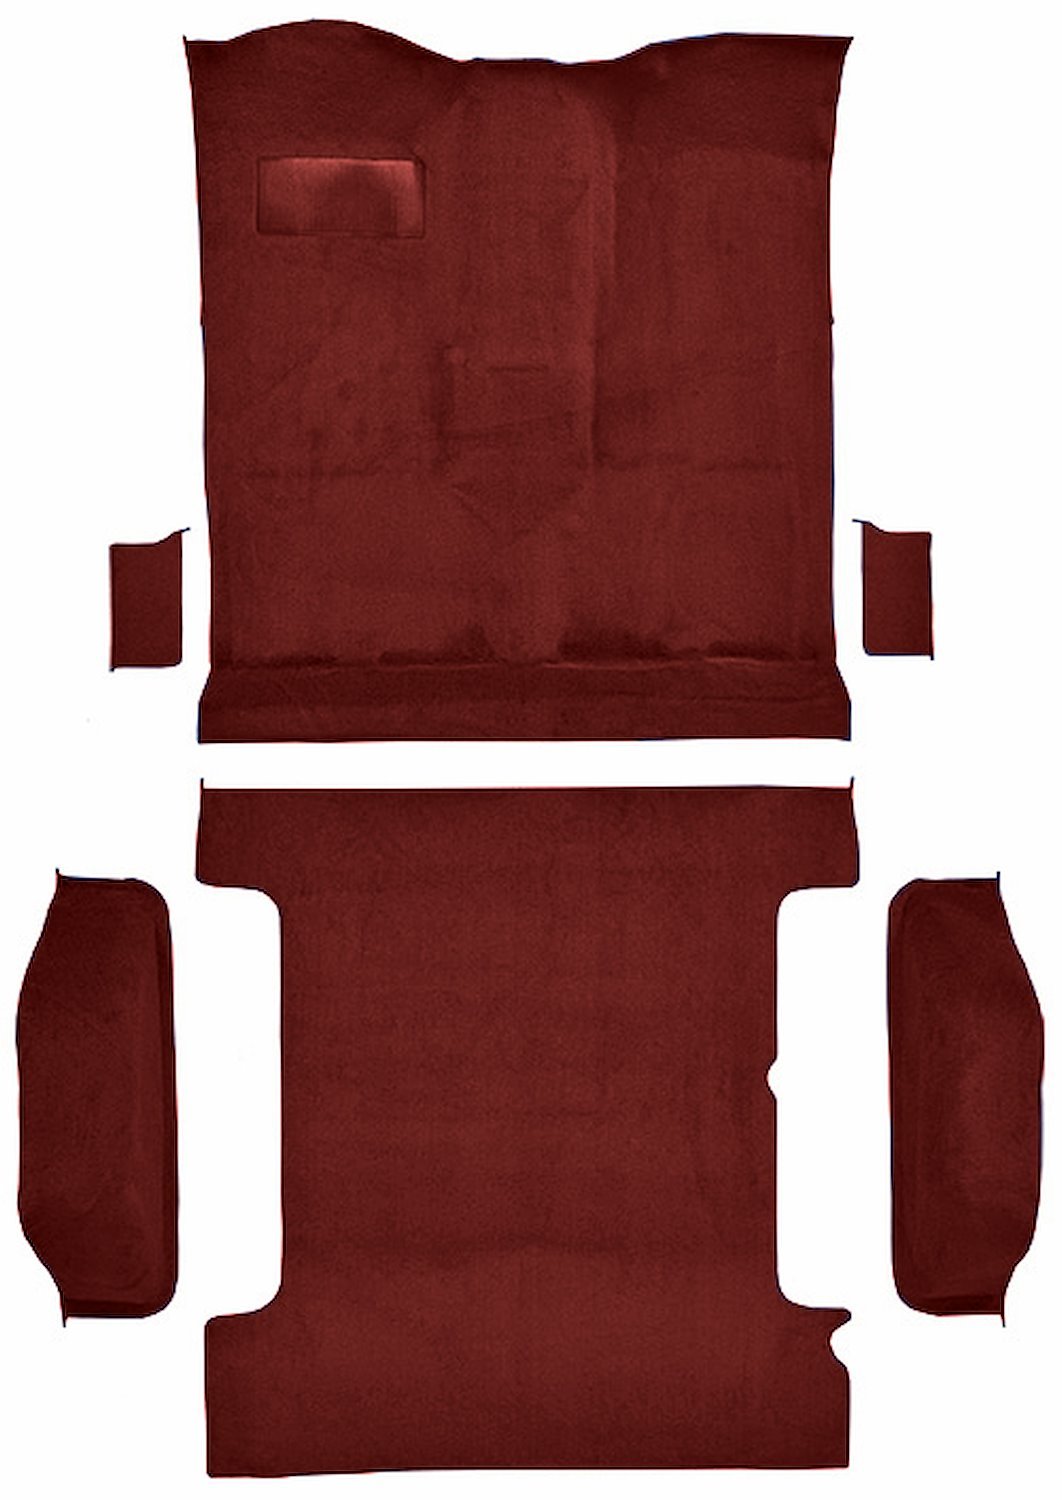 Molded Cut Pile Passenger and Cargo Area Carpet for 1978-1980 Chevy K5 Blazer, GMC Jimmy [OE- Jute Backing, 6-Piece, Oxblood]